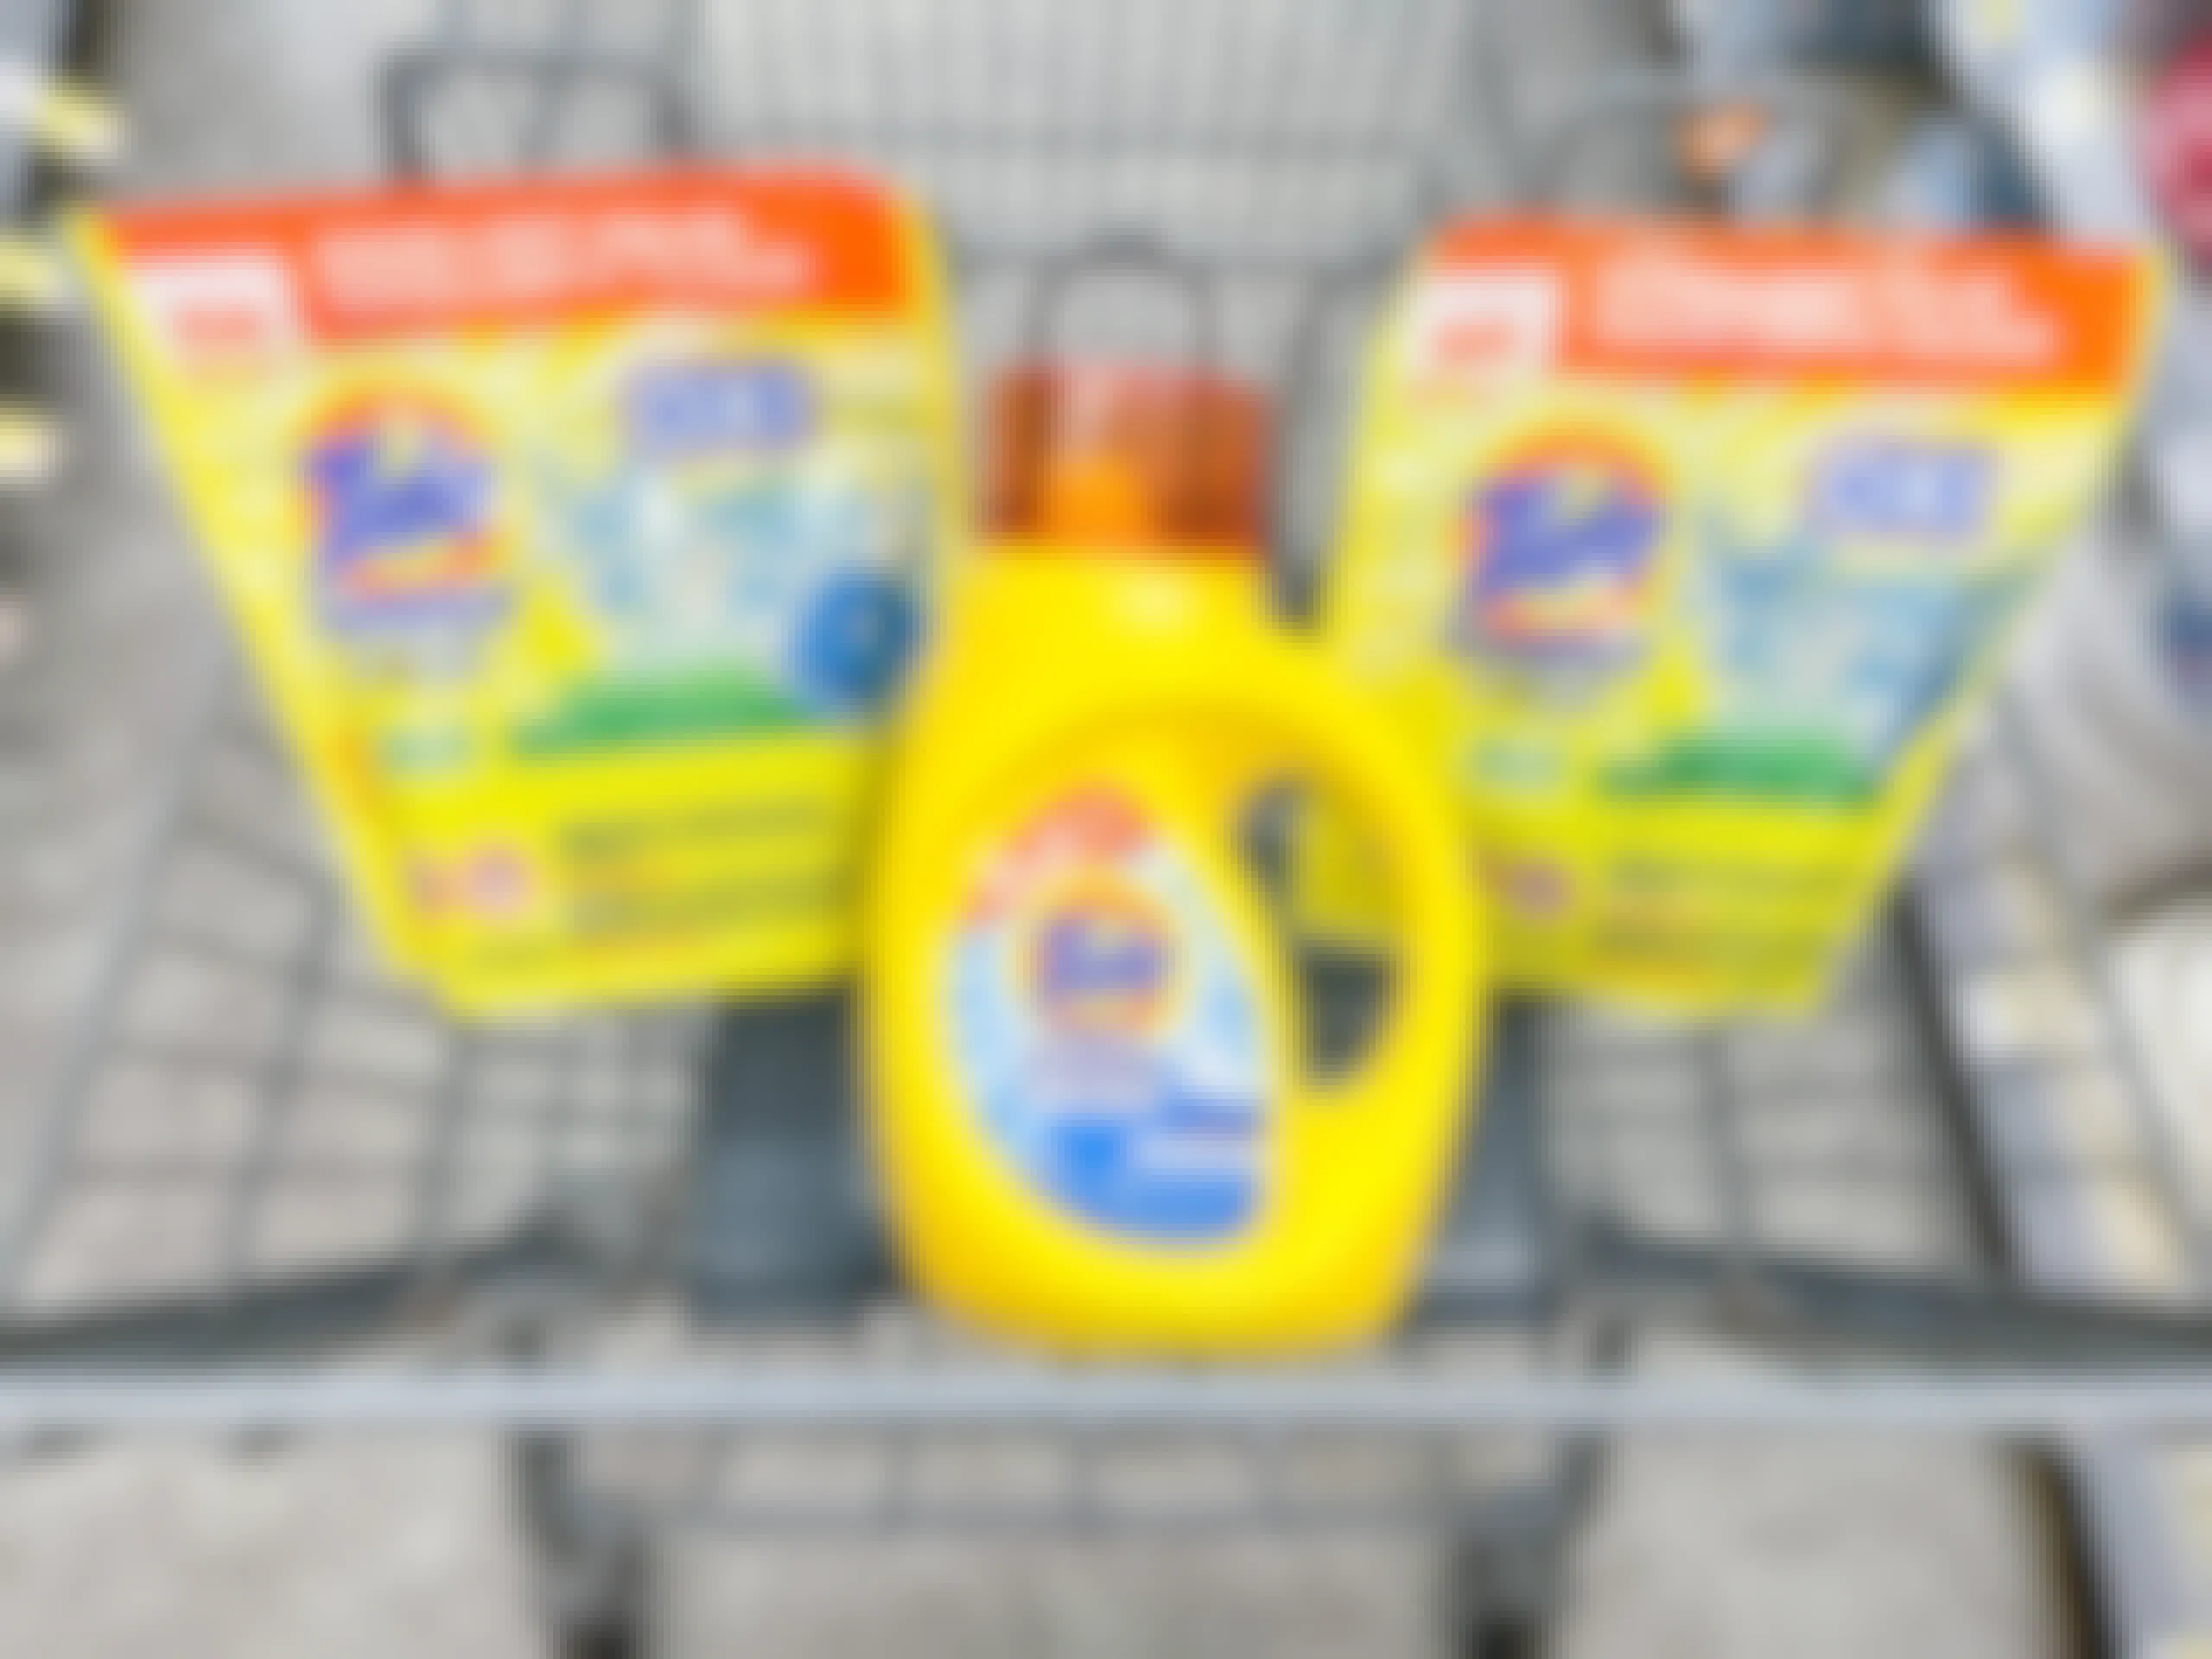 tide simply detergent in shopping cart